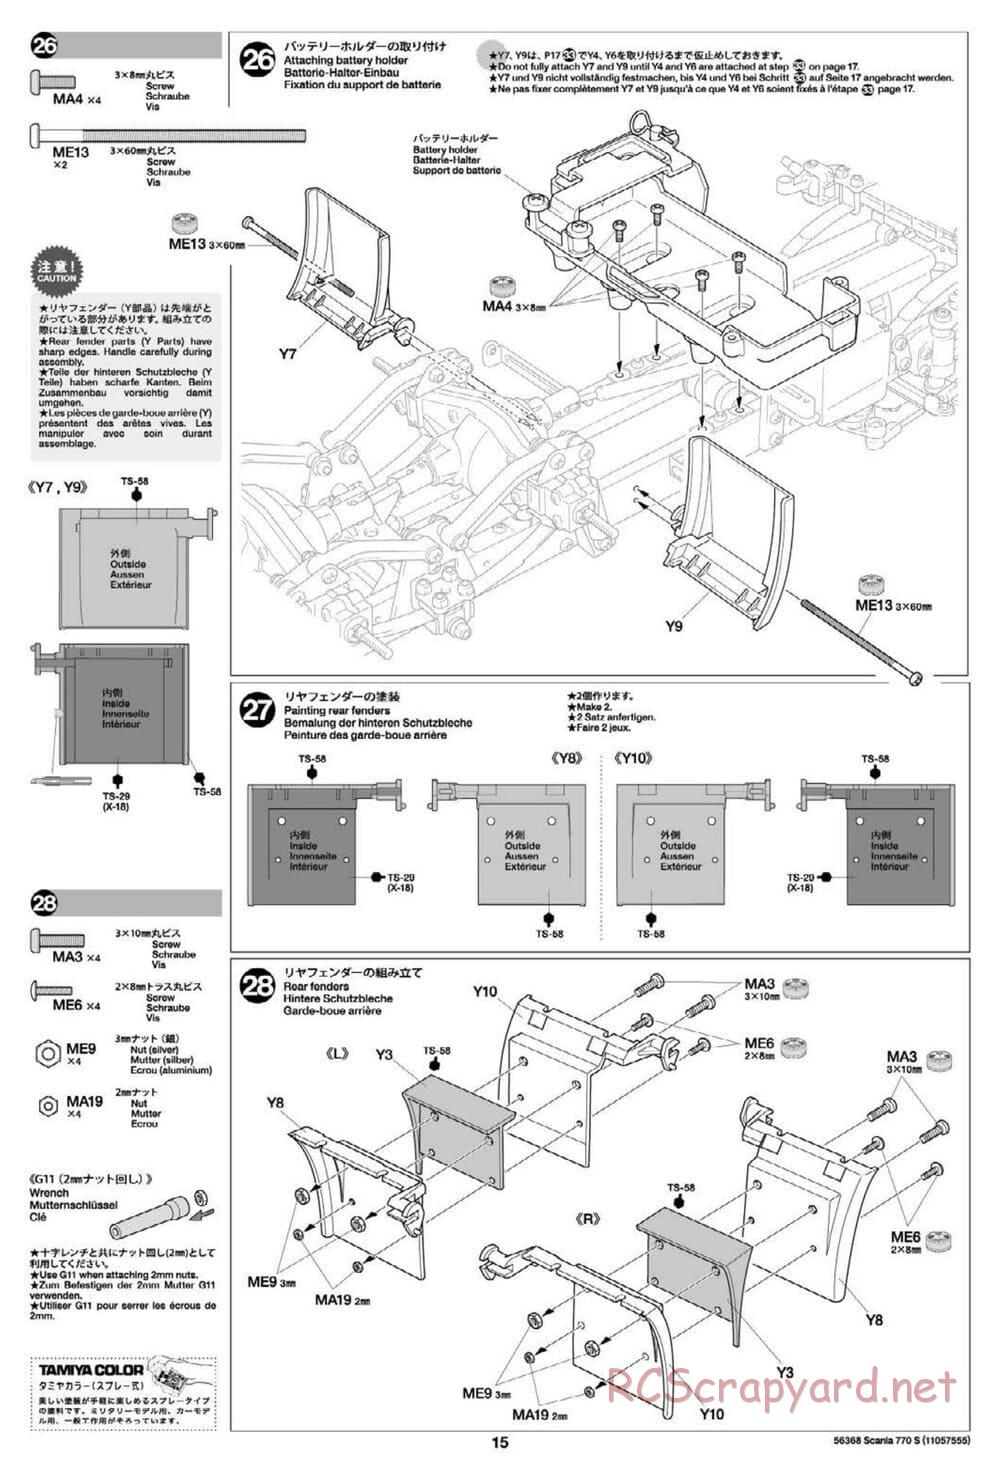 Tamiya - Scania 770S 6x4 Tractor Truck Chassis - Manual - Page 15